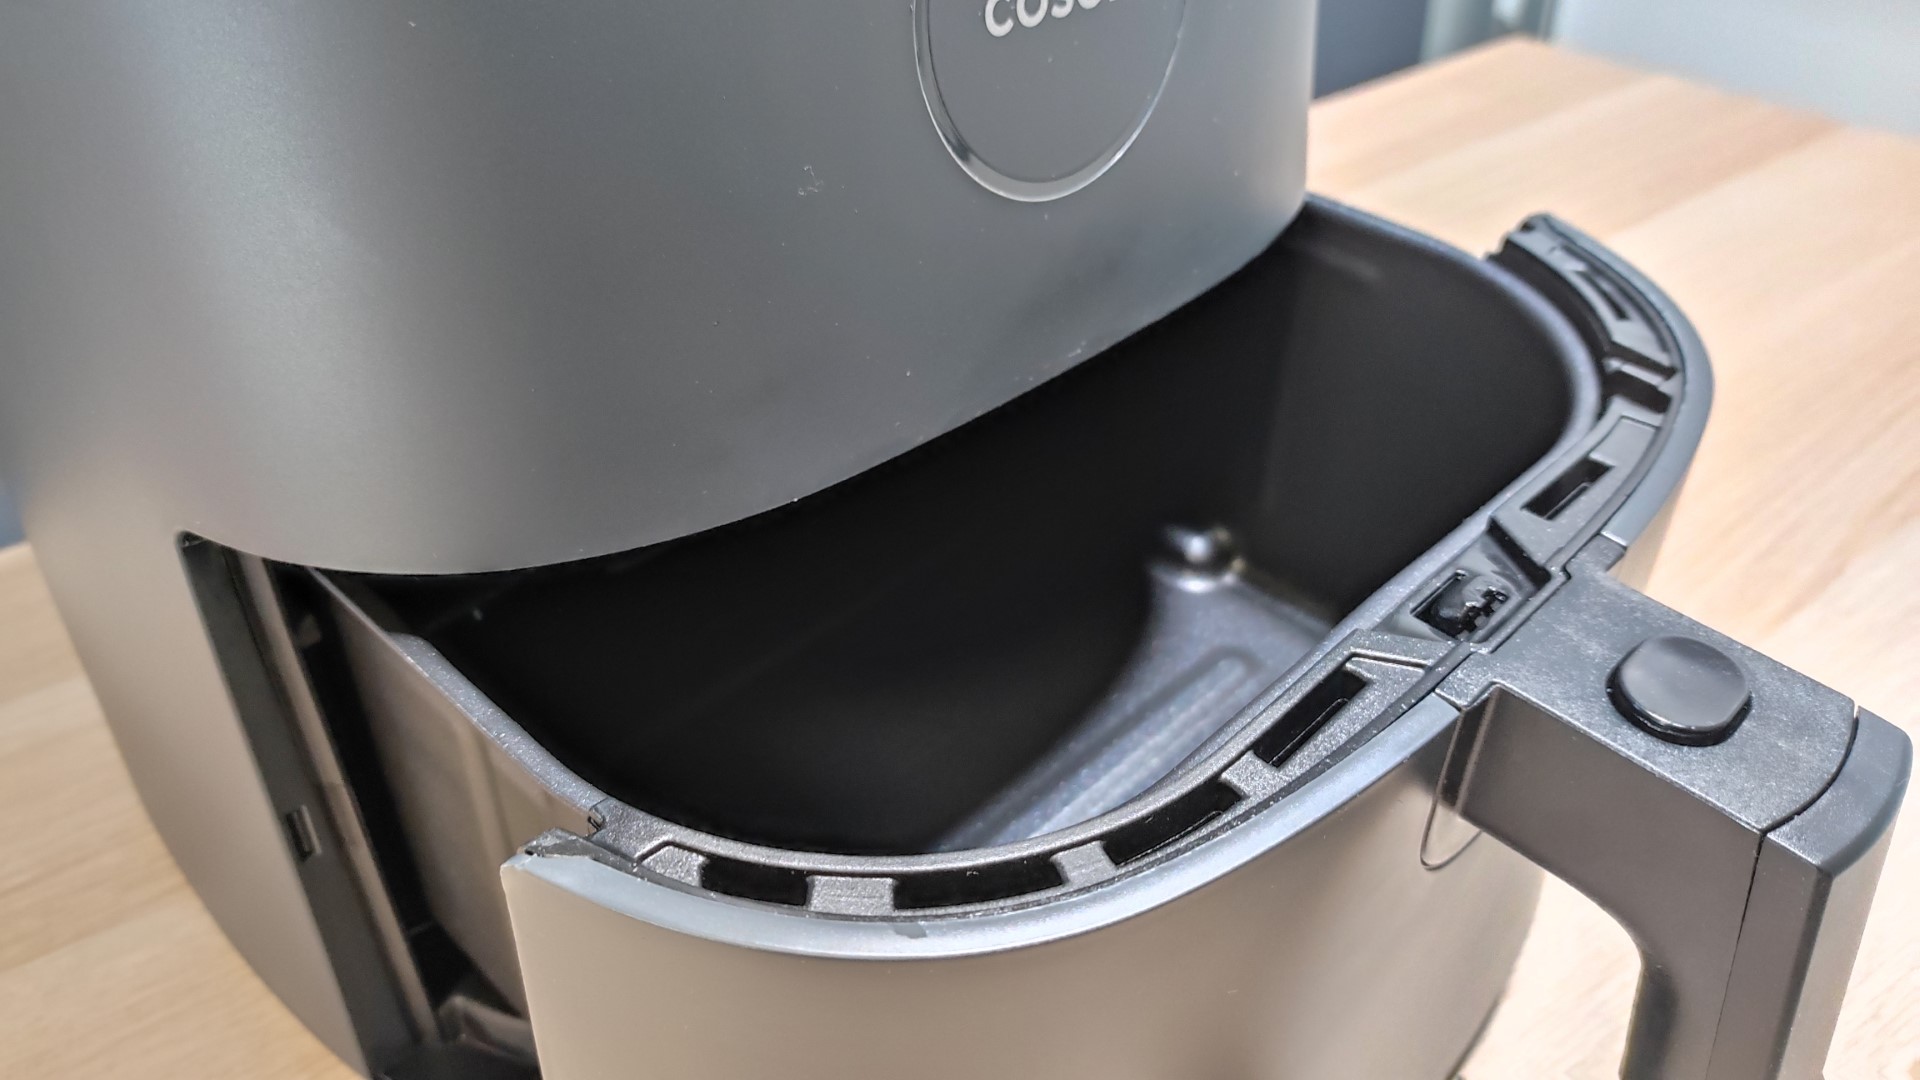 2 million Cosori air fryers are being recalled due to safety concerns